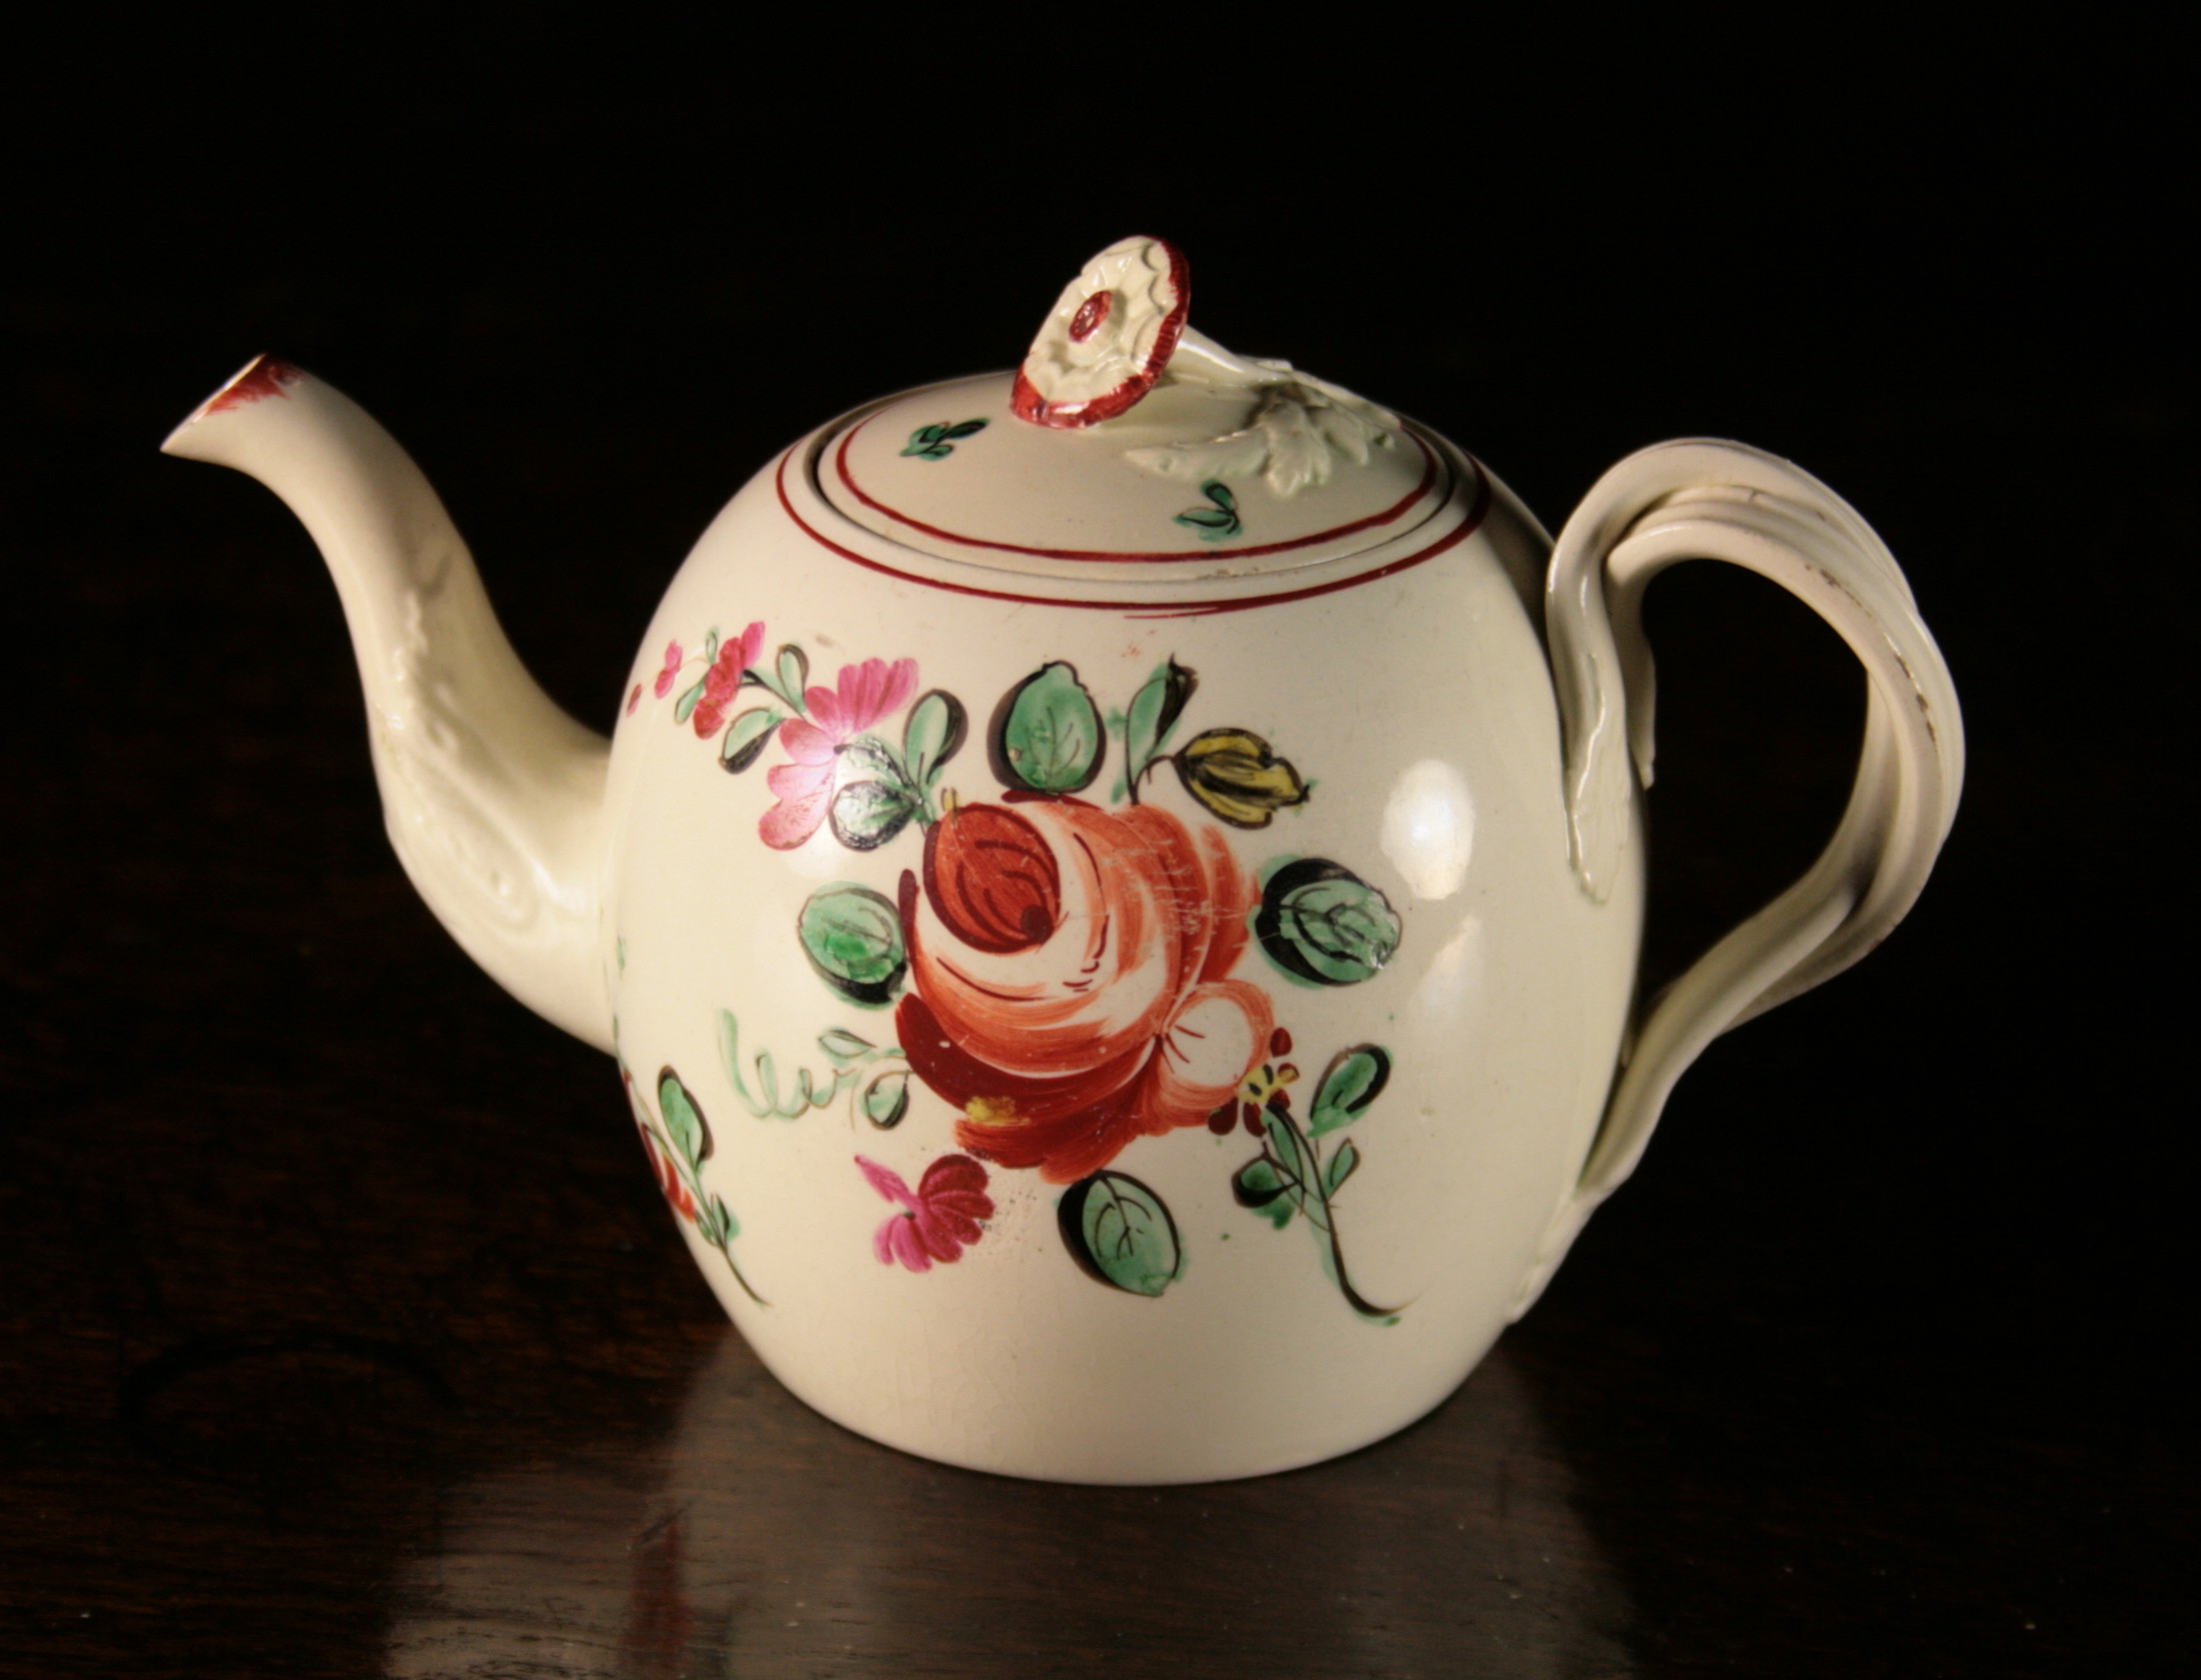 An 18th Century Creamware Teapot.  The globular body decorated with roses and having an entwined